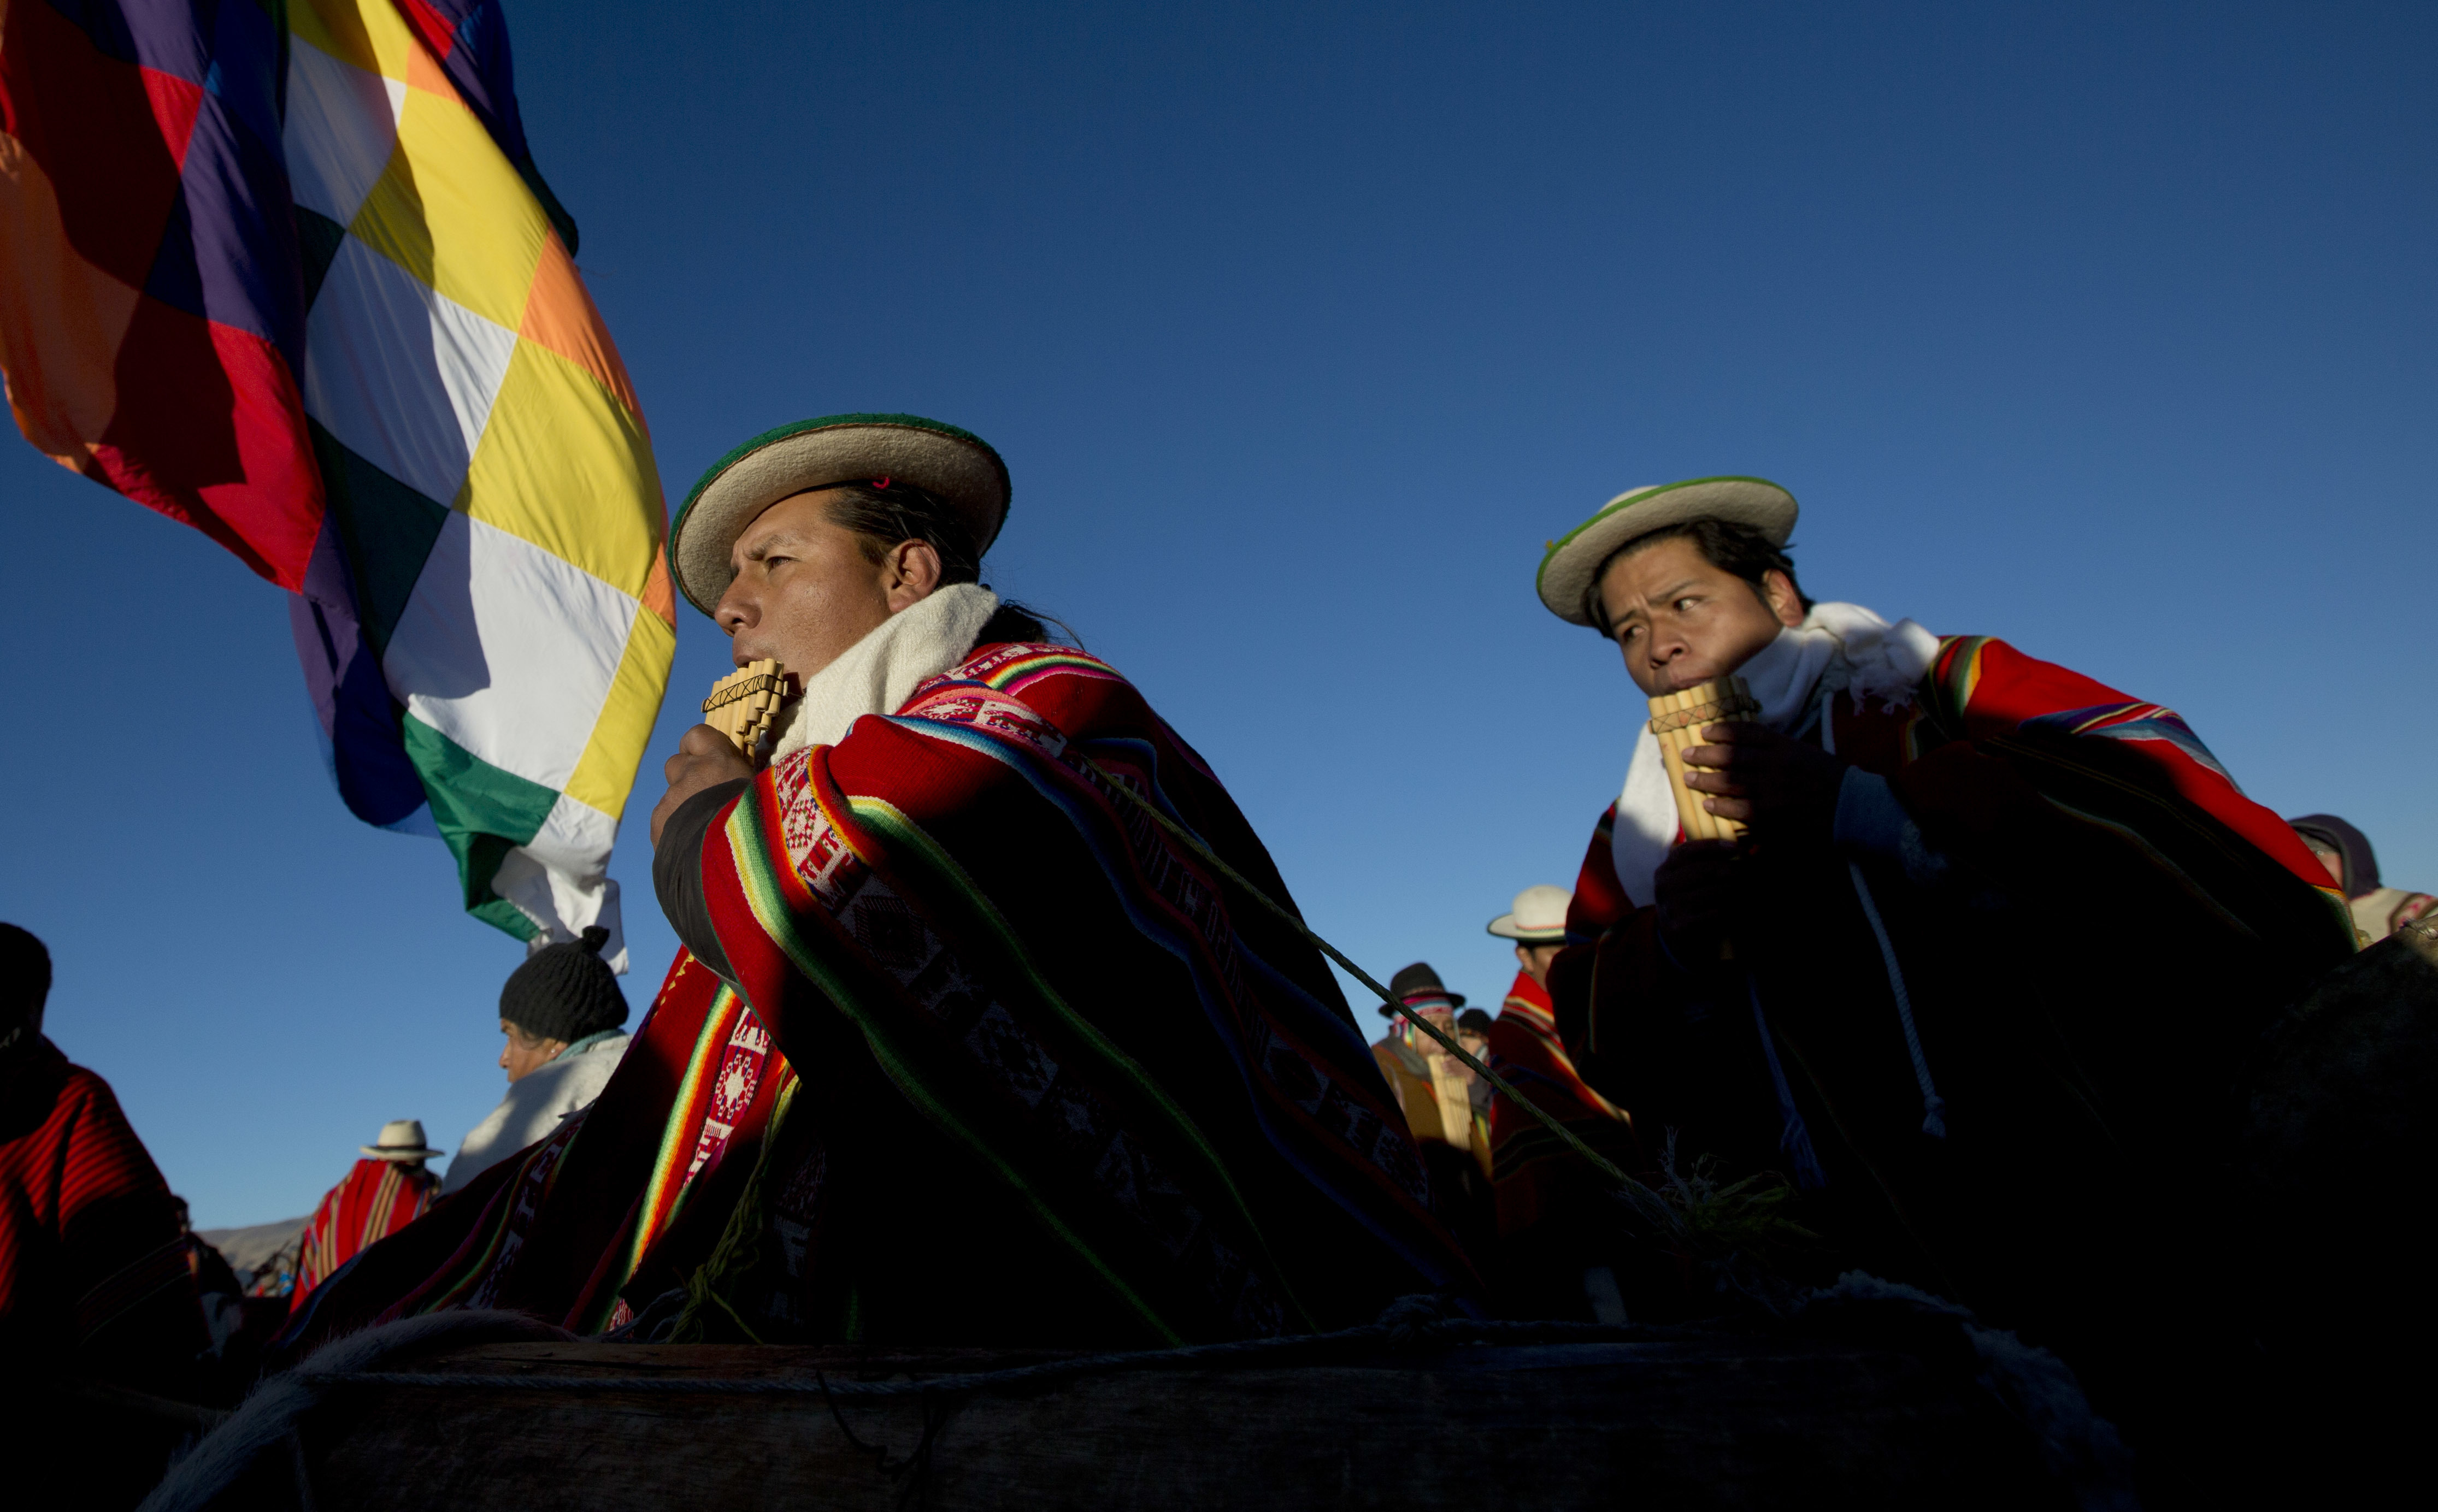 Aymara indigenous musicians play flutes and drums after receiving the first rays of sunlight during a New Year's ritual in the ruins of the ancient city Tiwanaku, Bolivia, early Tuesday, June 21, 2016. Bolivia's Aymara Indians are celebrating the year 5,524 as well as the Southern Hemisphere's winter solstice, which marks the start of a new agricultural cycle. (AP Photo/Juan Karita)